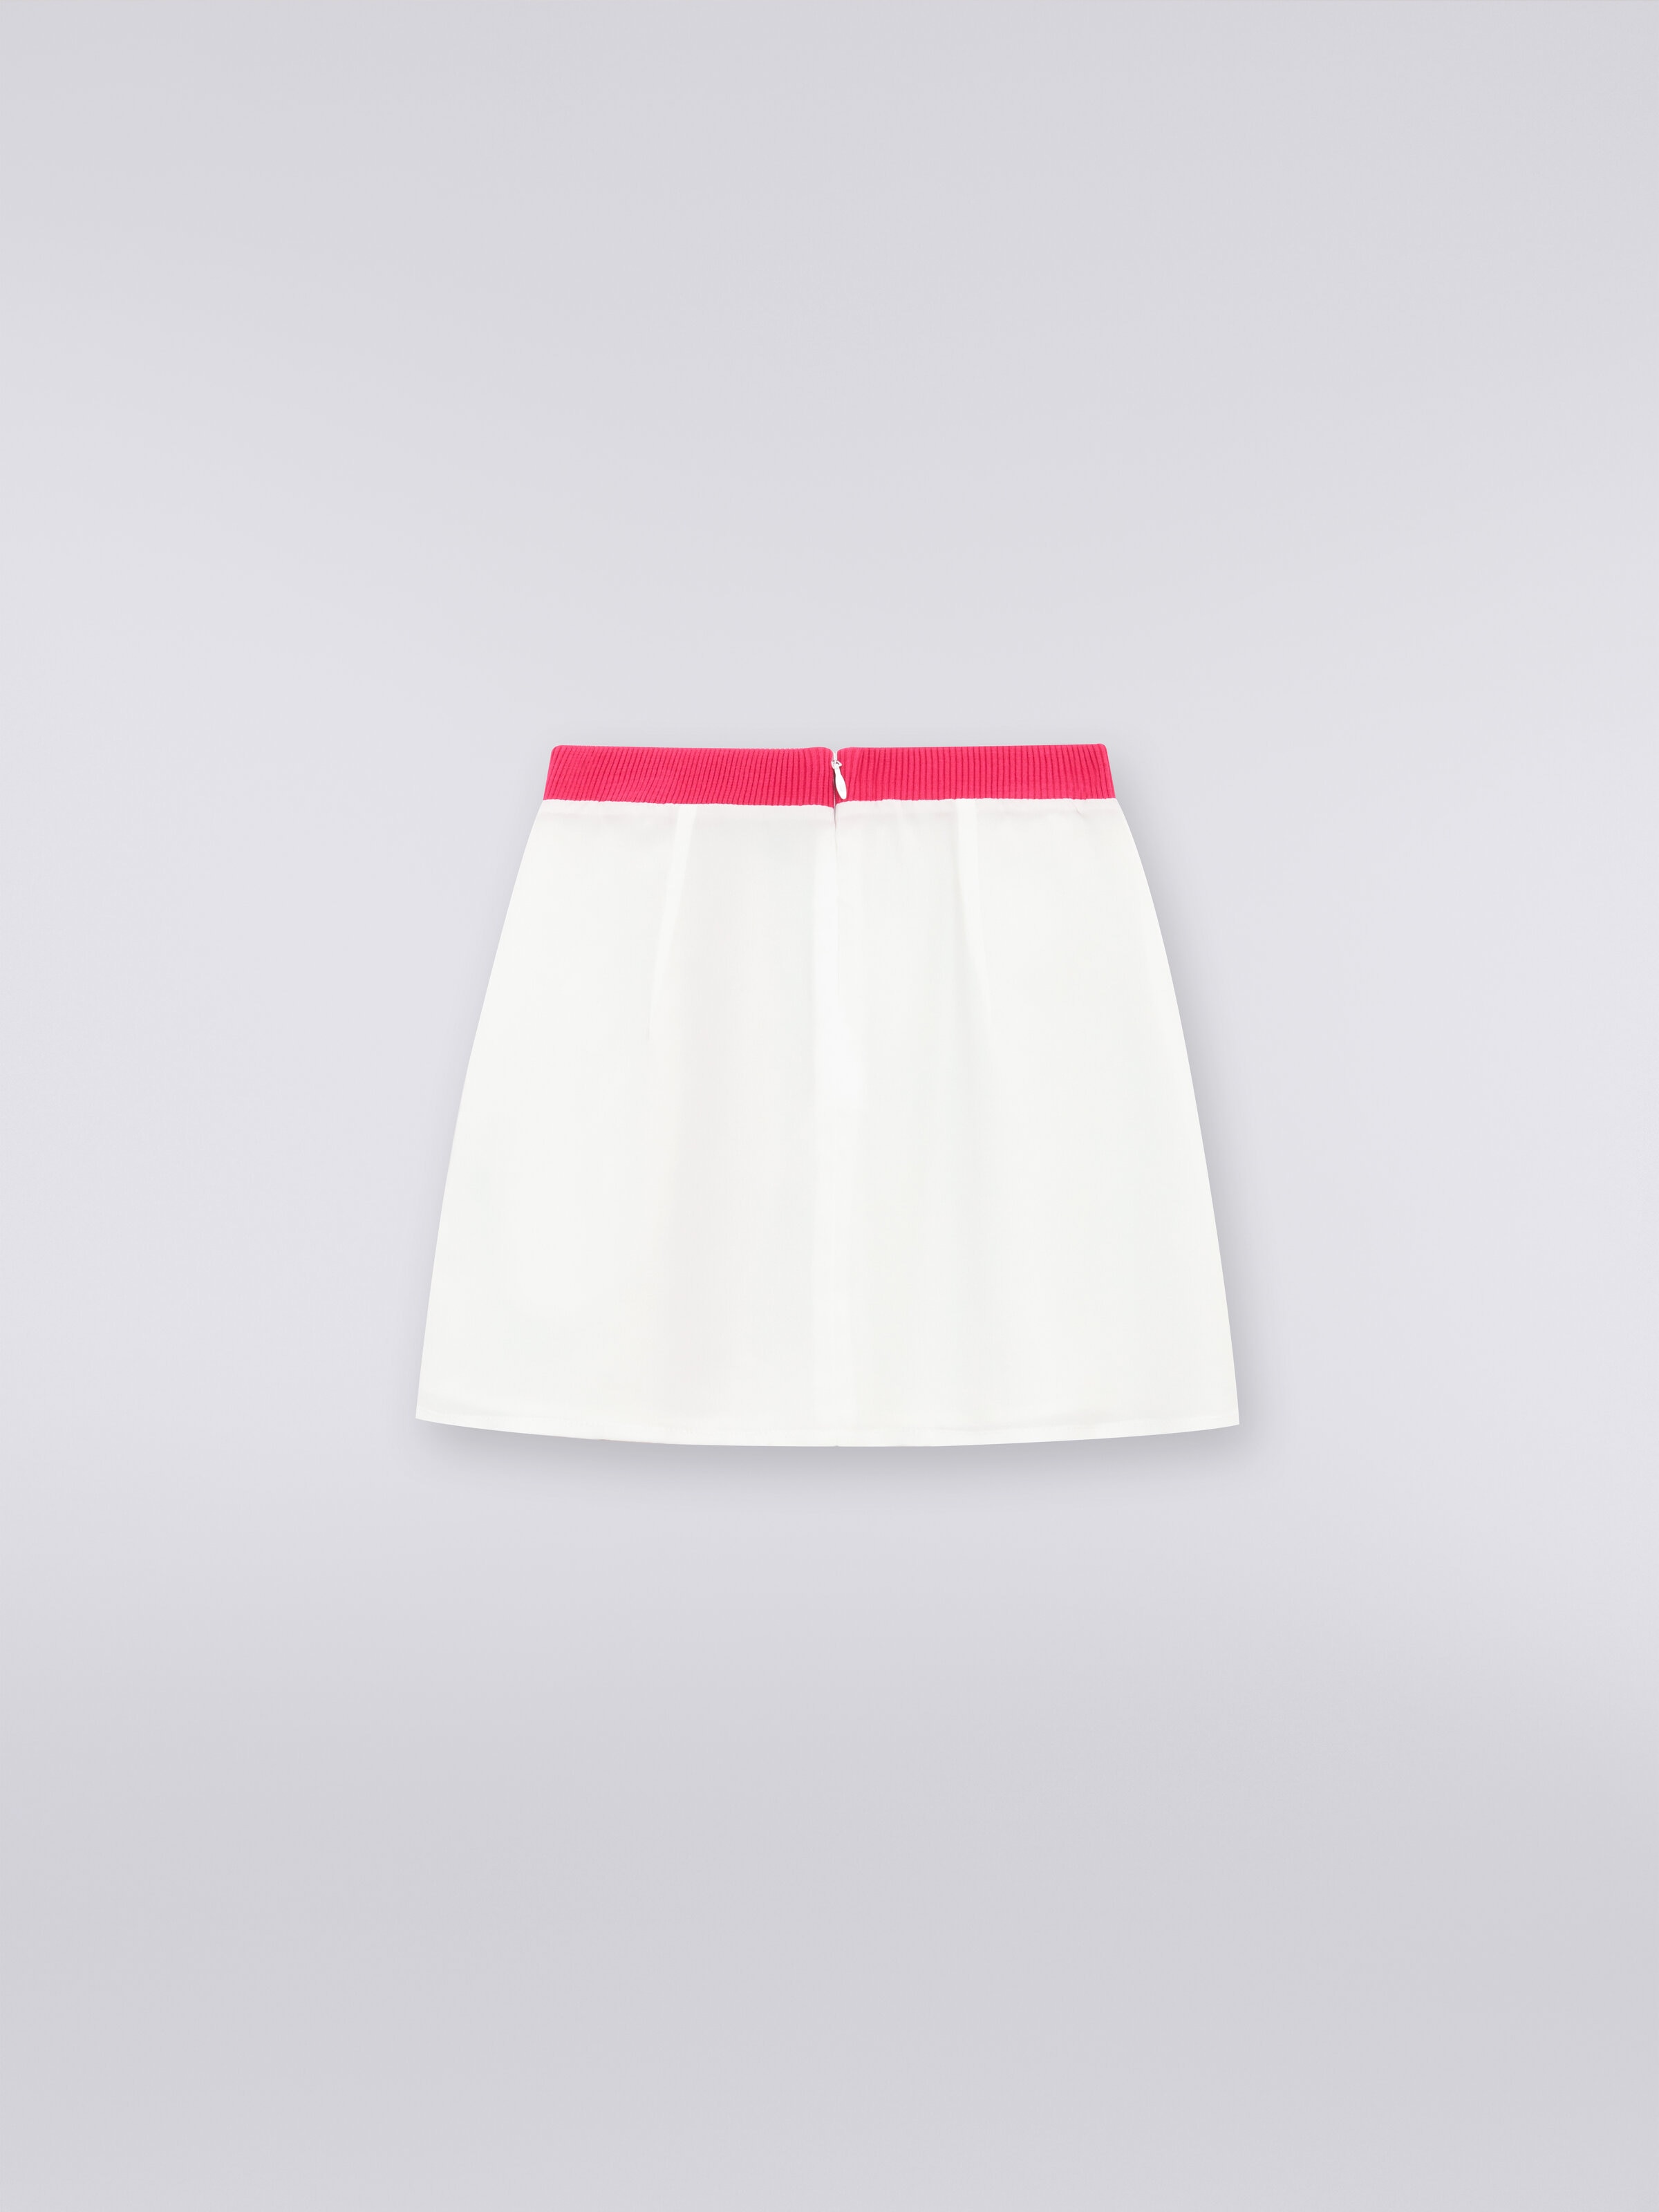 Silk and technical fabric skirt, Pink   - 1